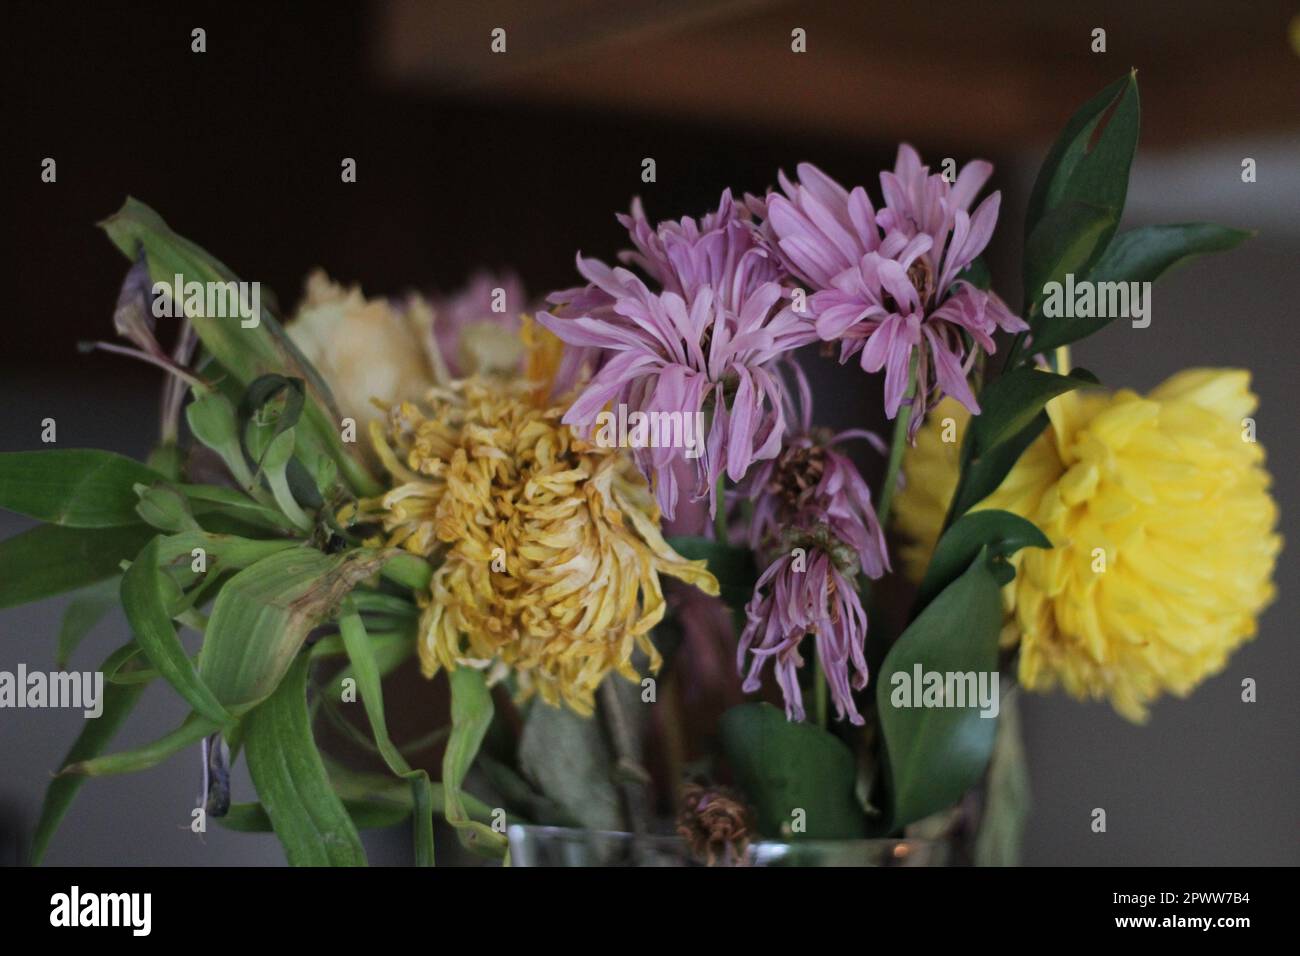 Close-up shot of a Wilting  Spring Floral Bouquet -Details and image has purple, yellow, and green throughout. Great for education or dramatic effect Stock Photo